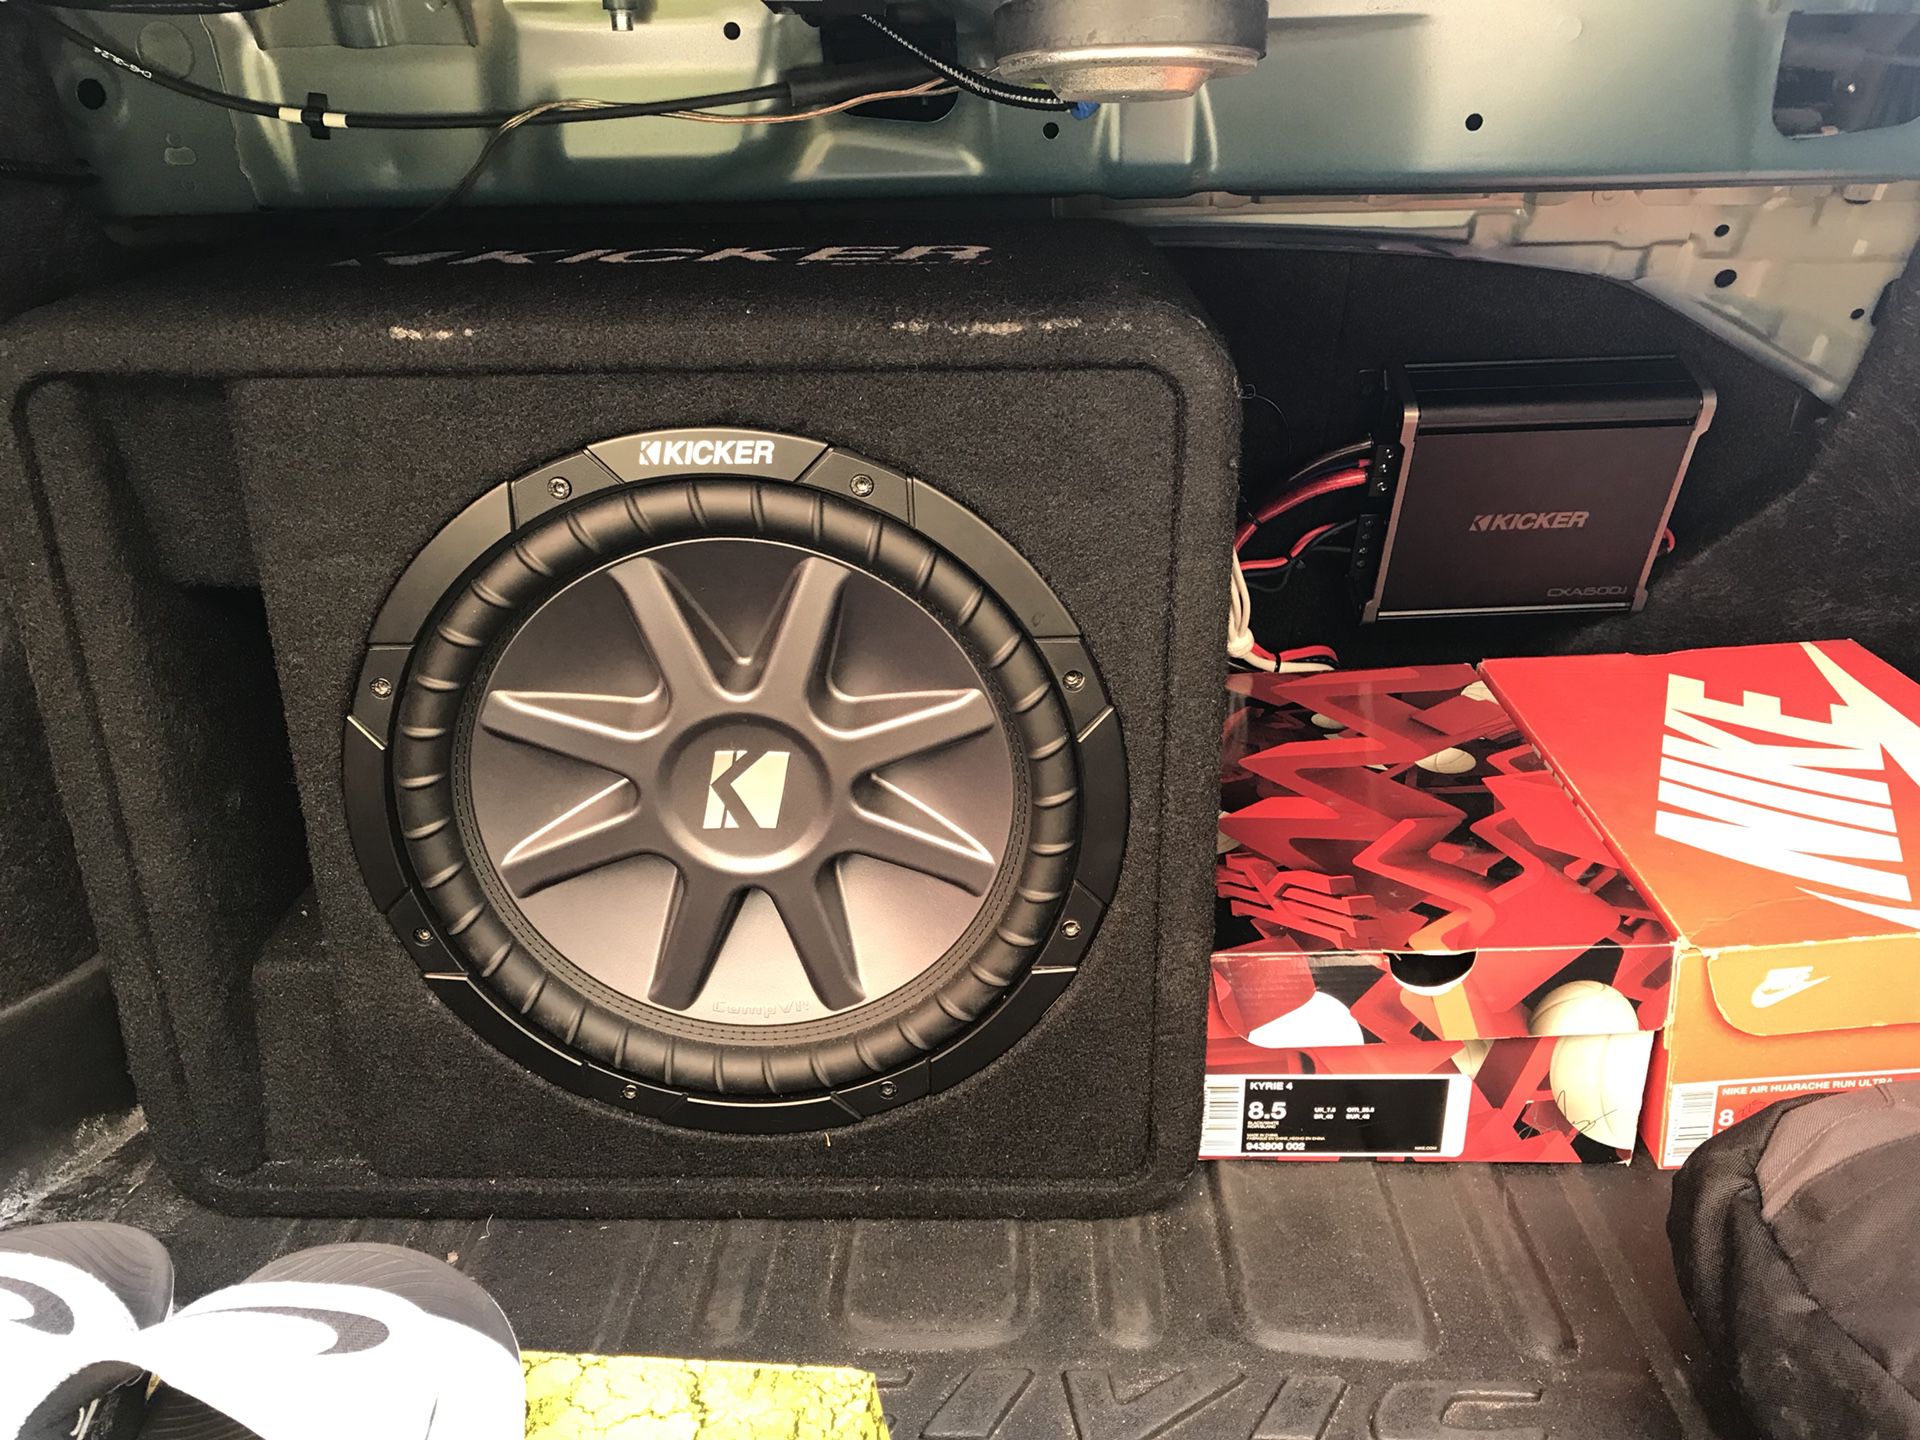 12 in kicker subwoofer with kicker amp